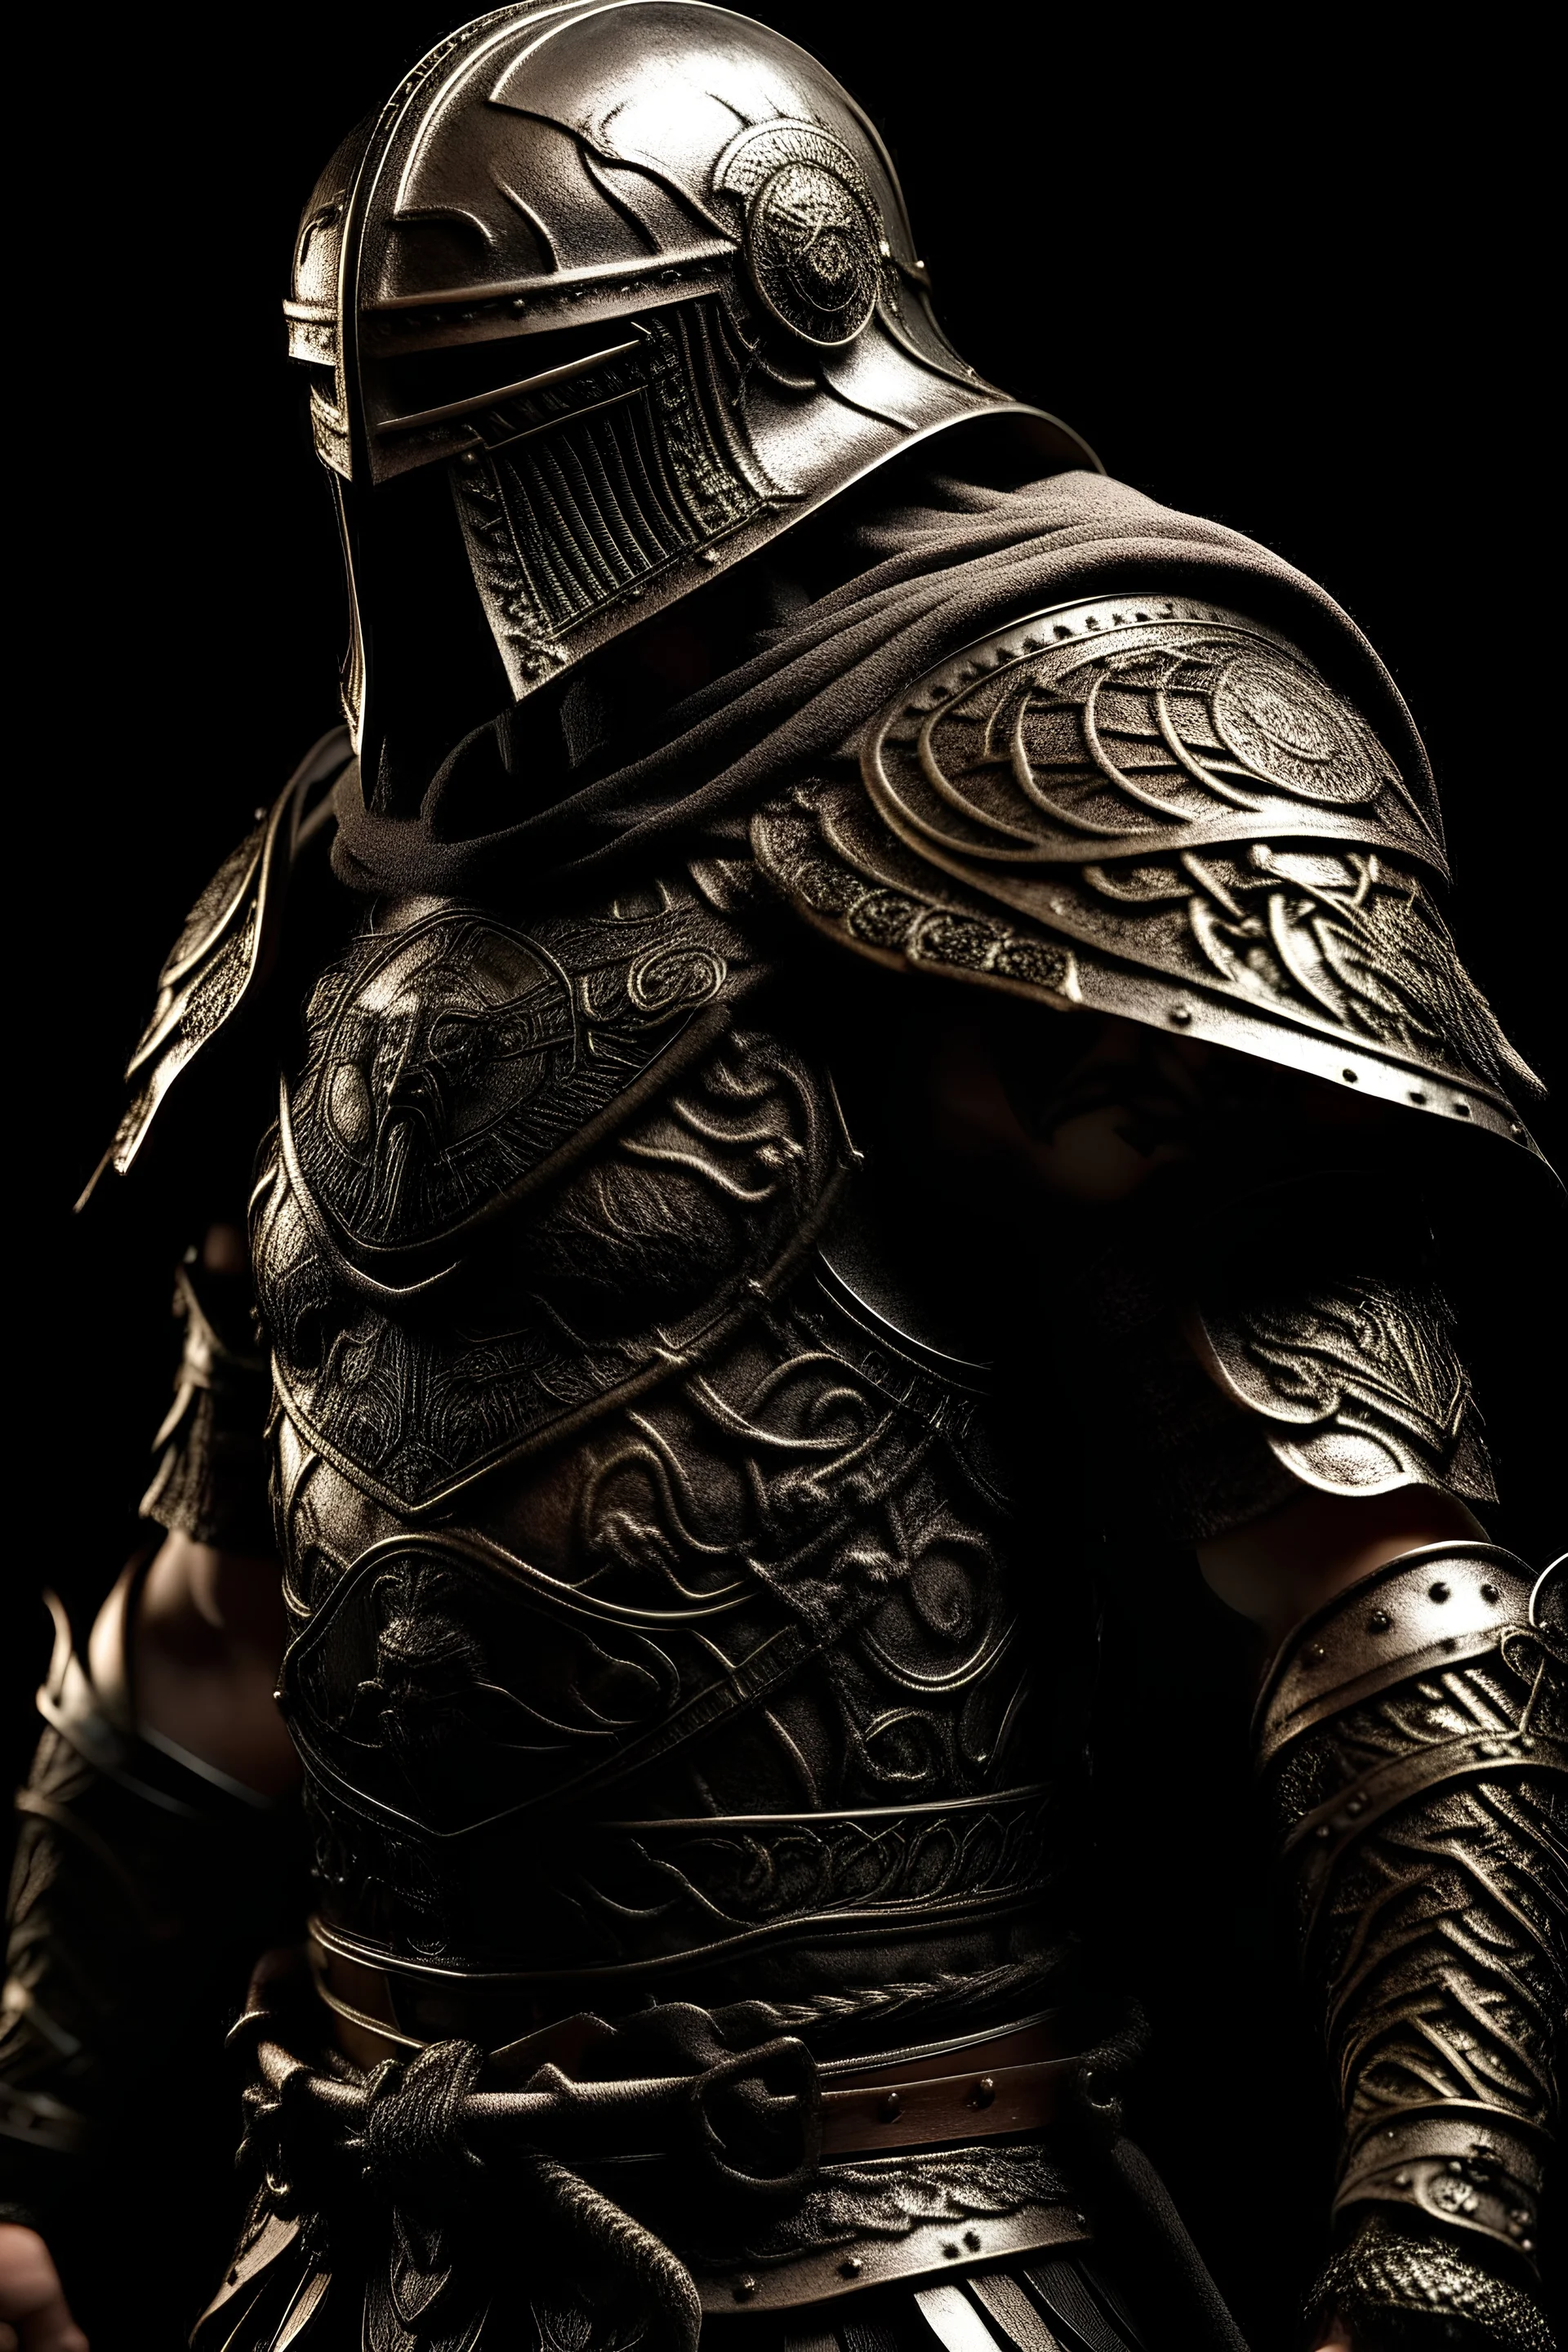 In the foreground, a formidable Celtic warrior commands attention with his commanding presence. Clad in meticulously crafted armor, the warrior exudes strength and resilience. The armor, intricately detailed, consists of overlapping metal plates, providing both protection and flexibility in battle. A flowing cloak, adorned with Celtic patterns, billows behind him, adding a touch of elegance to his formidable appearance. The warrior's face is obscured by a thick black and grey beard, framing a w